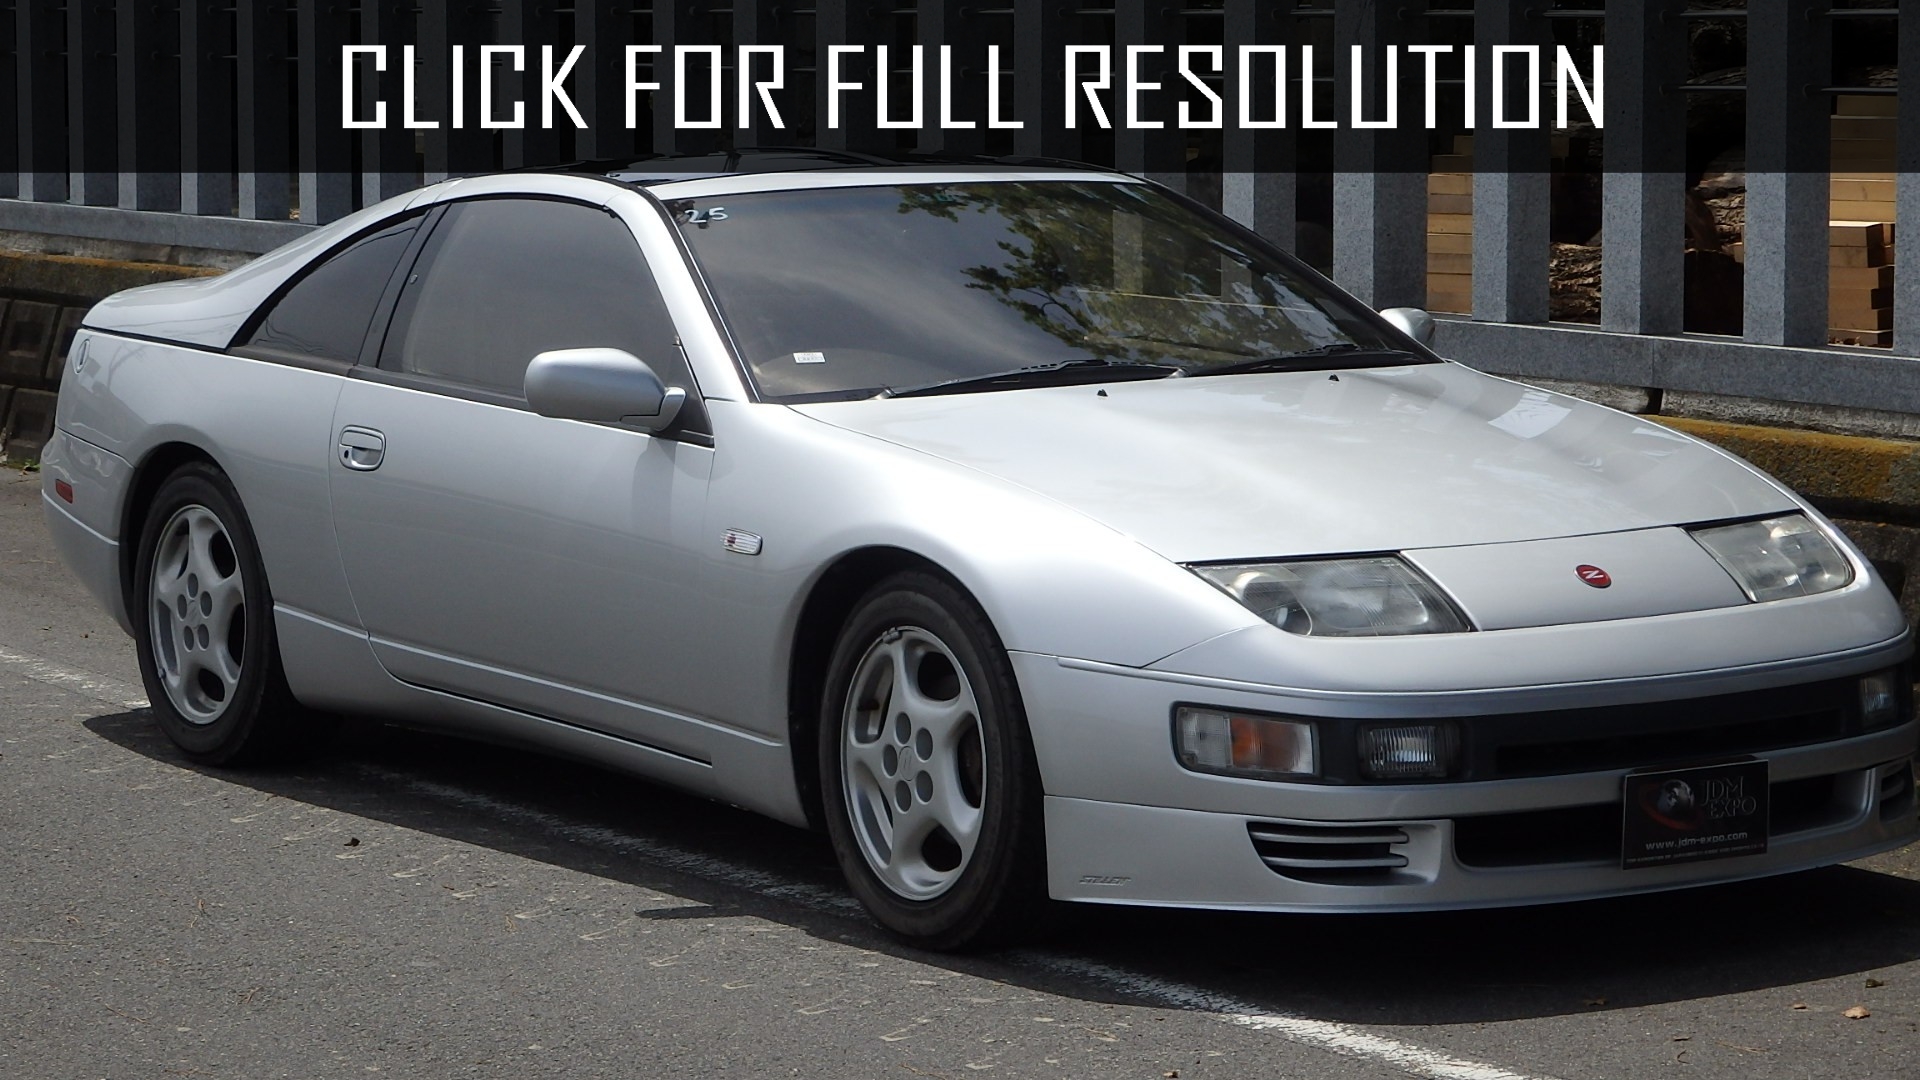 Nissan 300zx amazing photo gallery, some information and